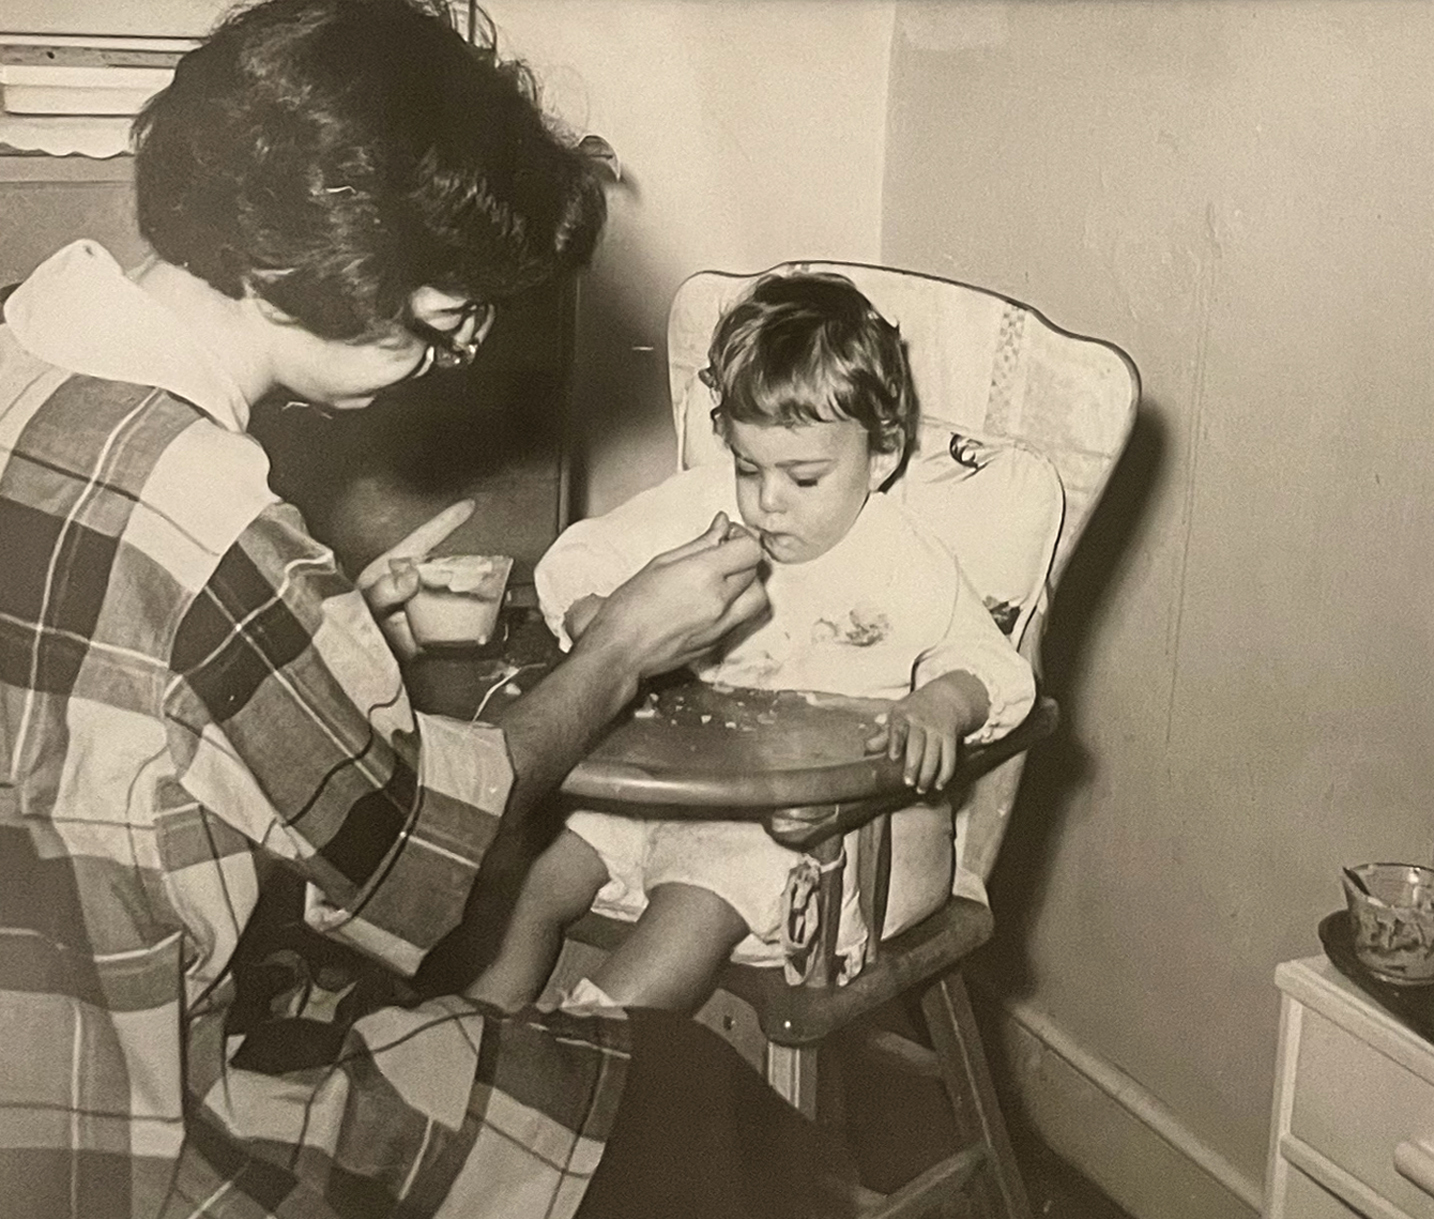 sepia photo of a baby in a wooden highchair being fed, courtesy Nancy Taylor